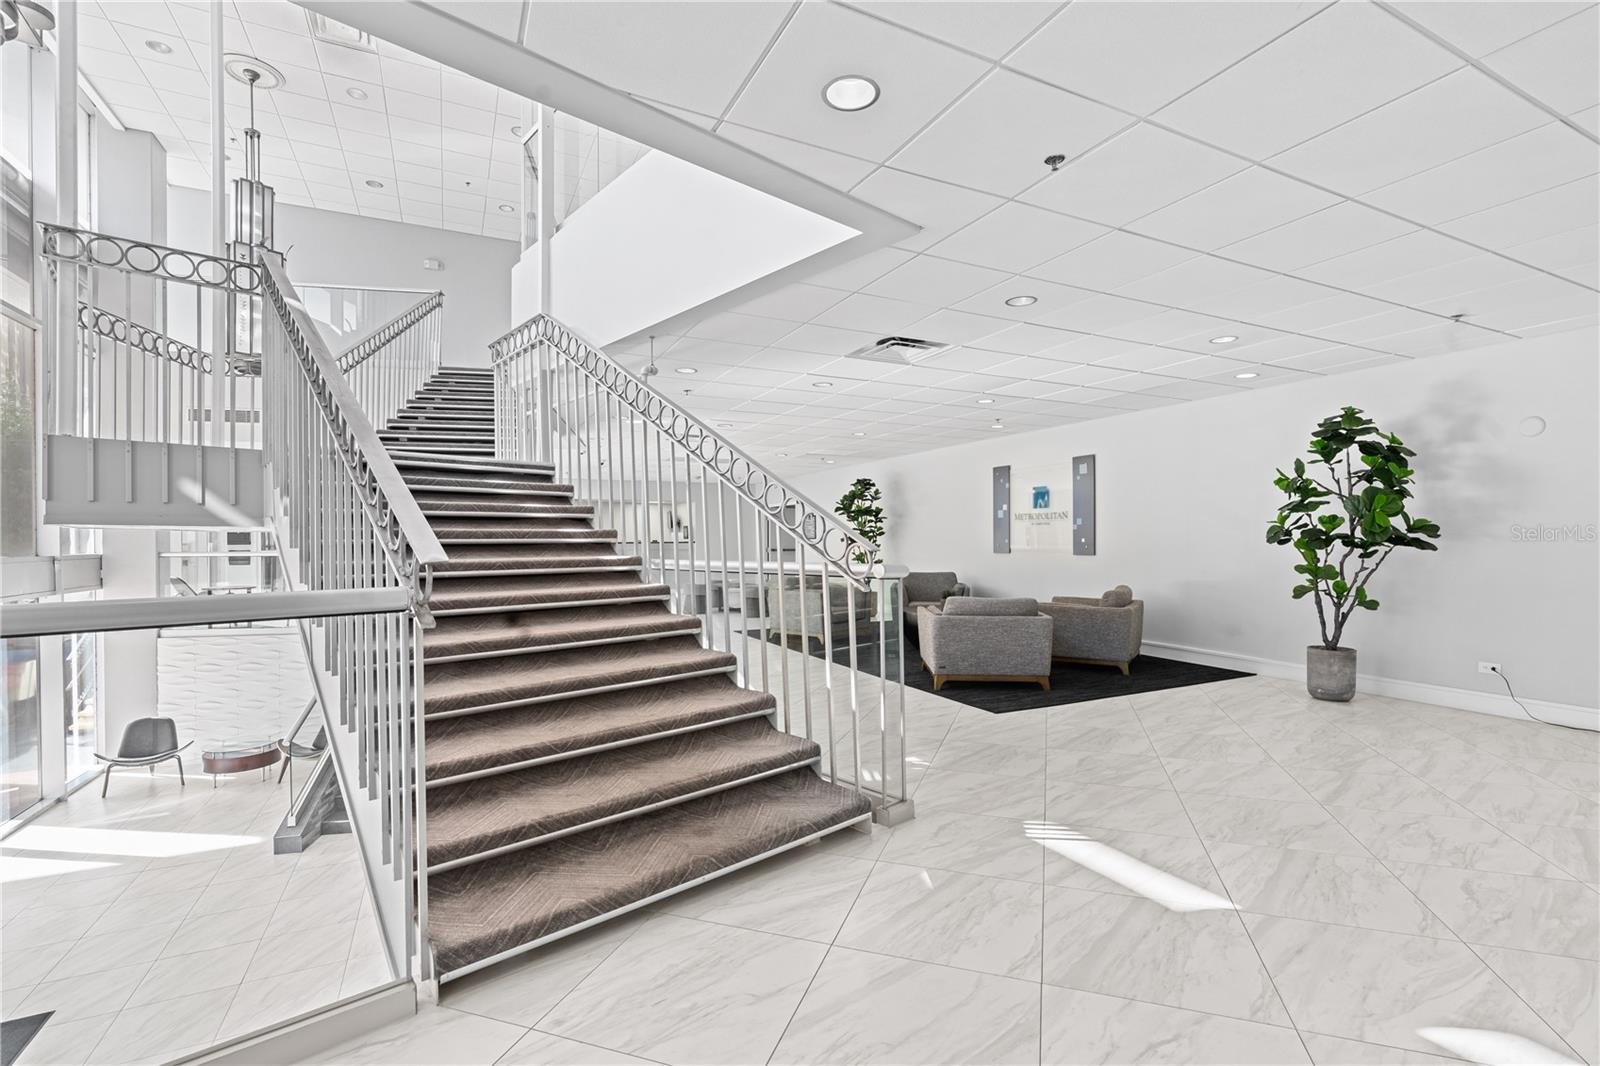 staircase and lobby with white decor and chairs